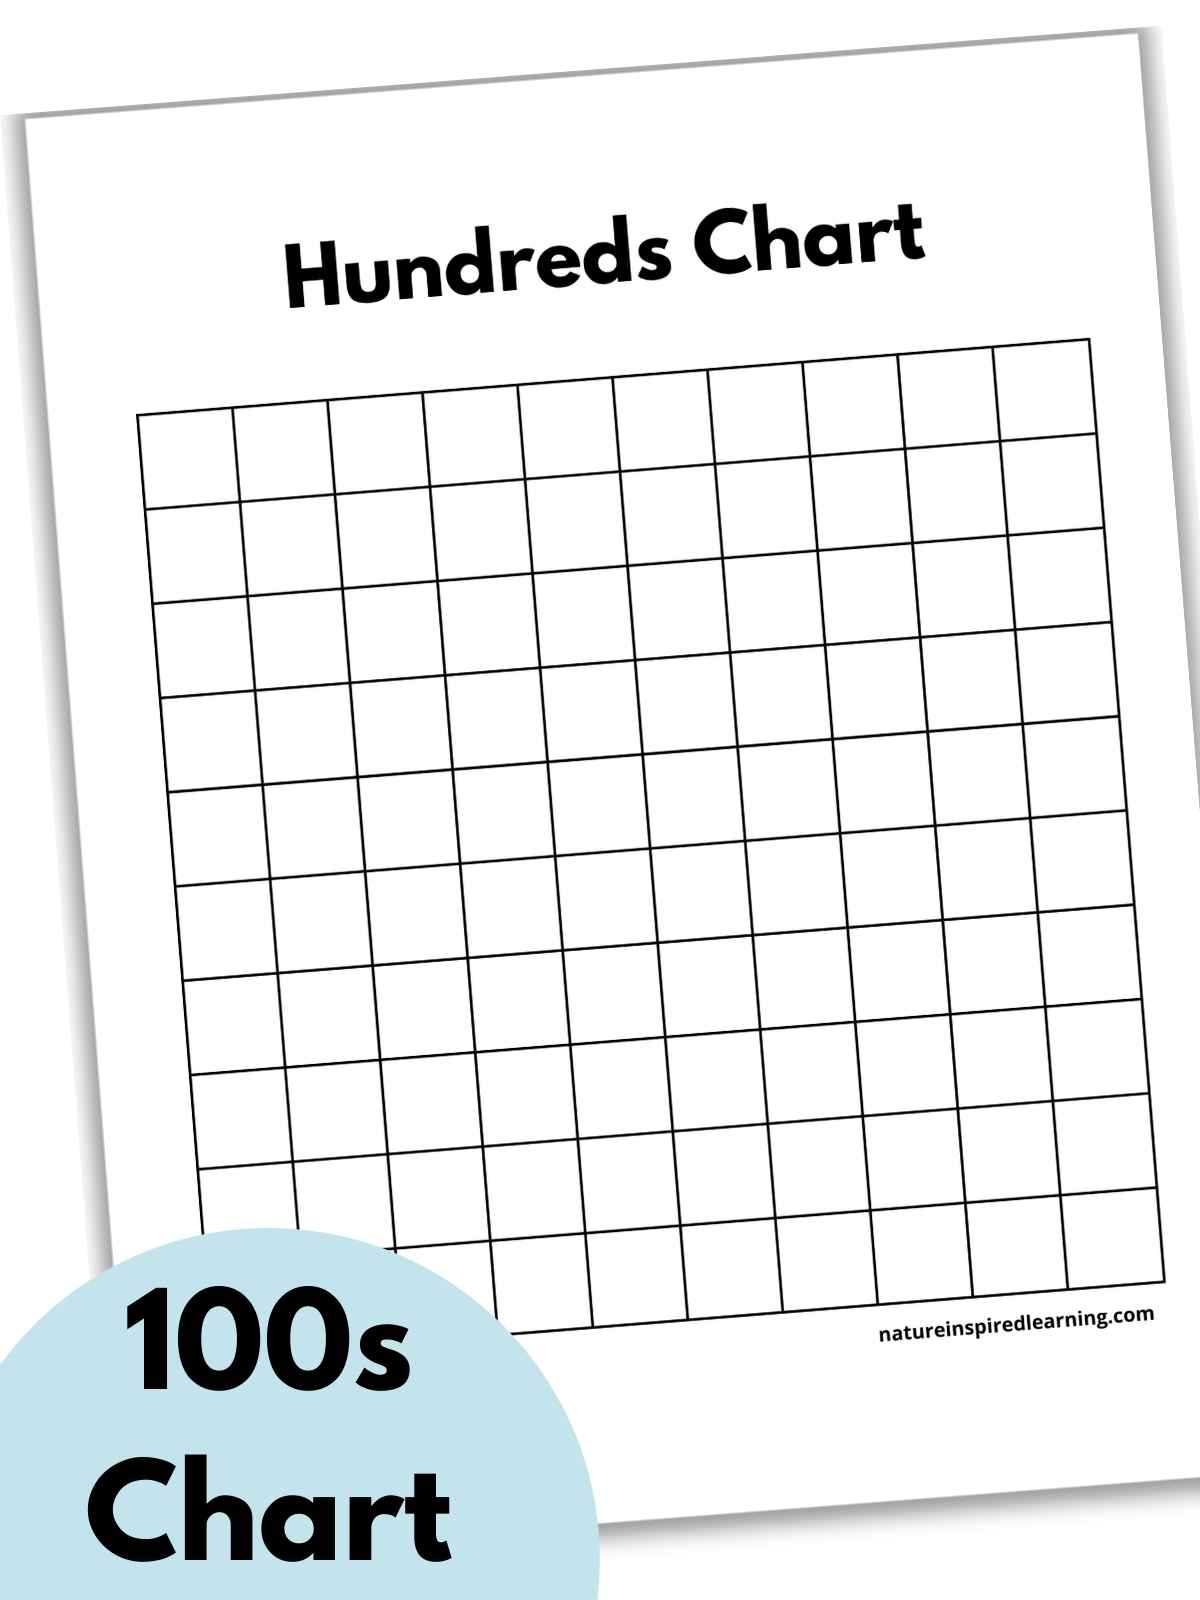 black and white blank hundreds chart with a title across the top of the sheet. Printable slanted with a light blue circle on top of the sheet with text overlay bottom left corner.